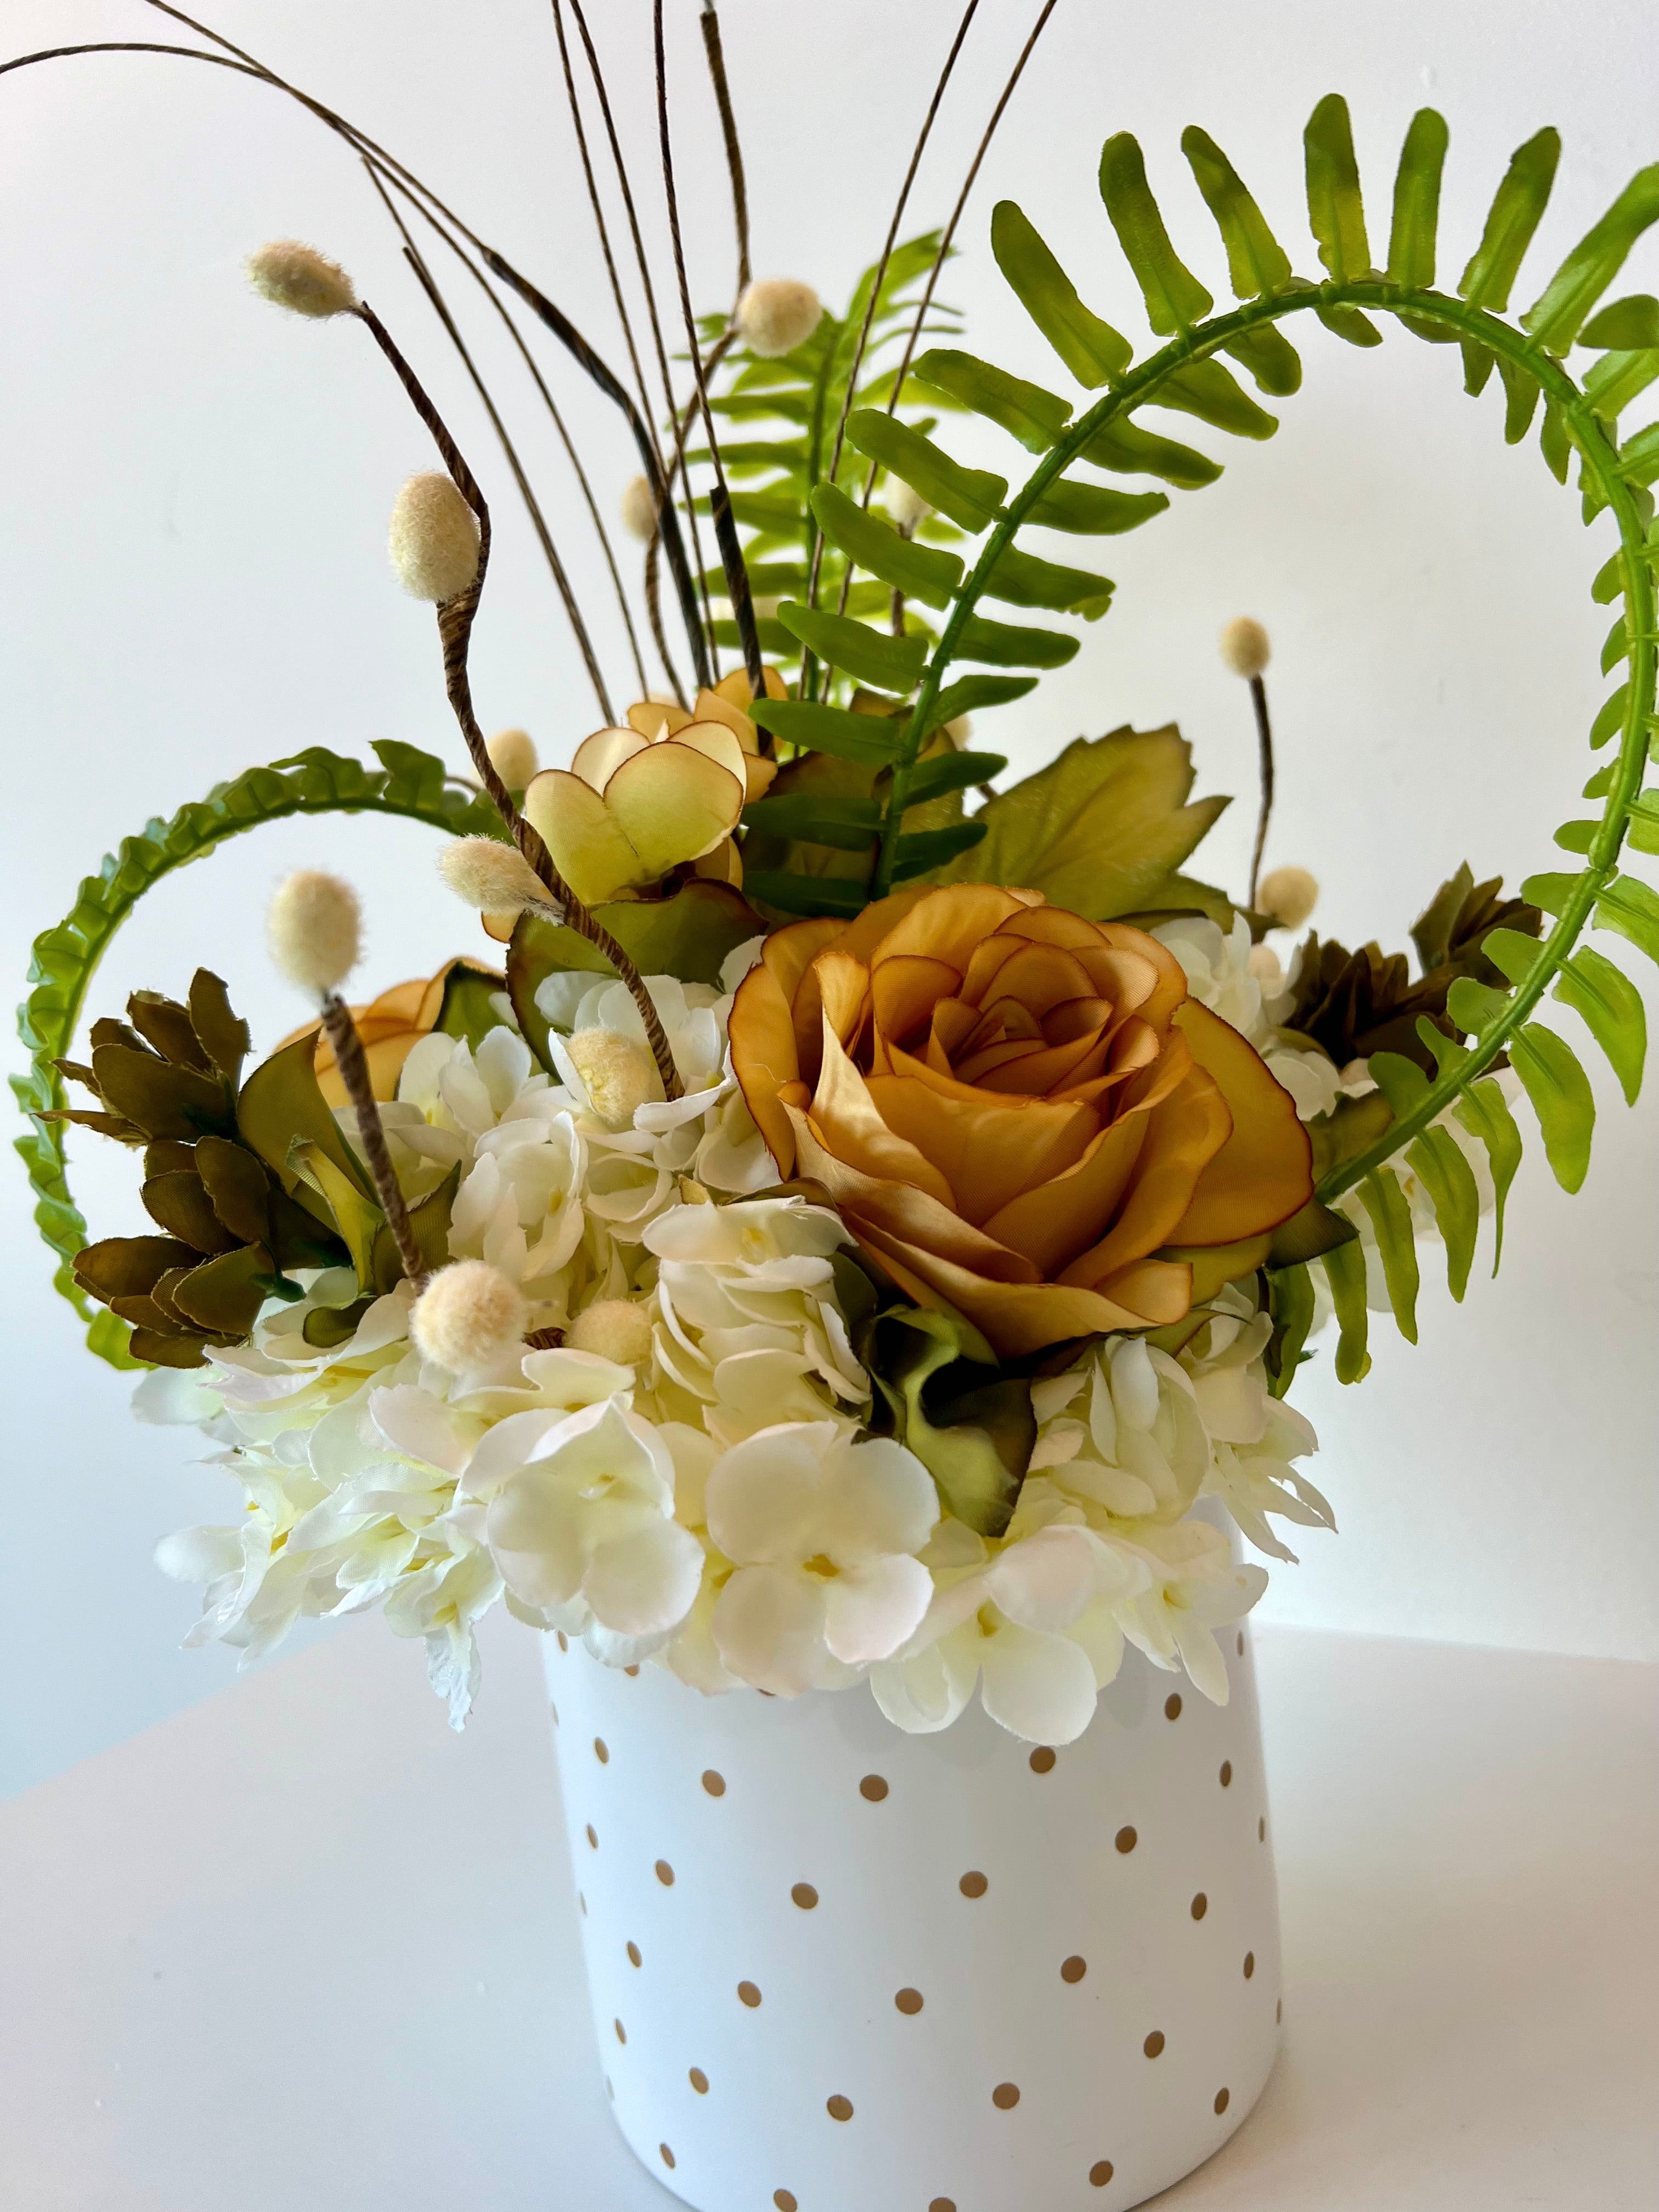 Green and White Arrangement